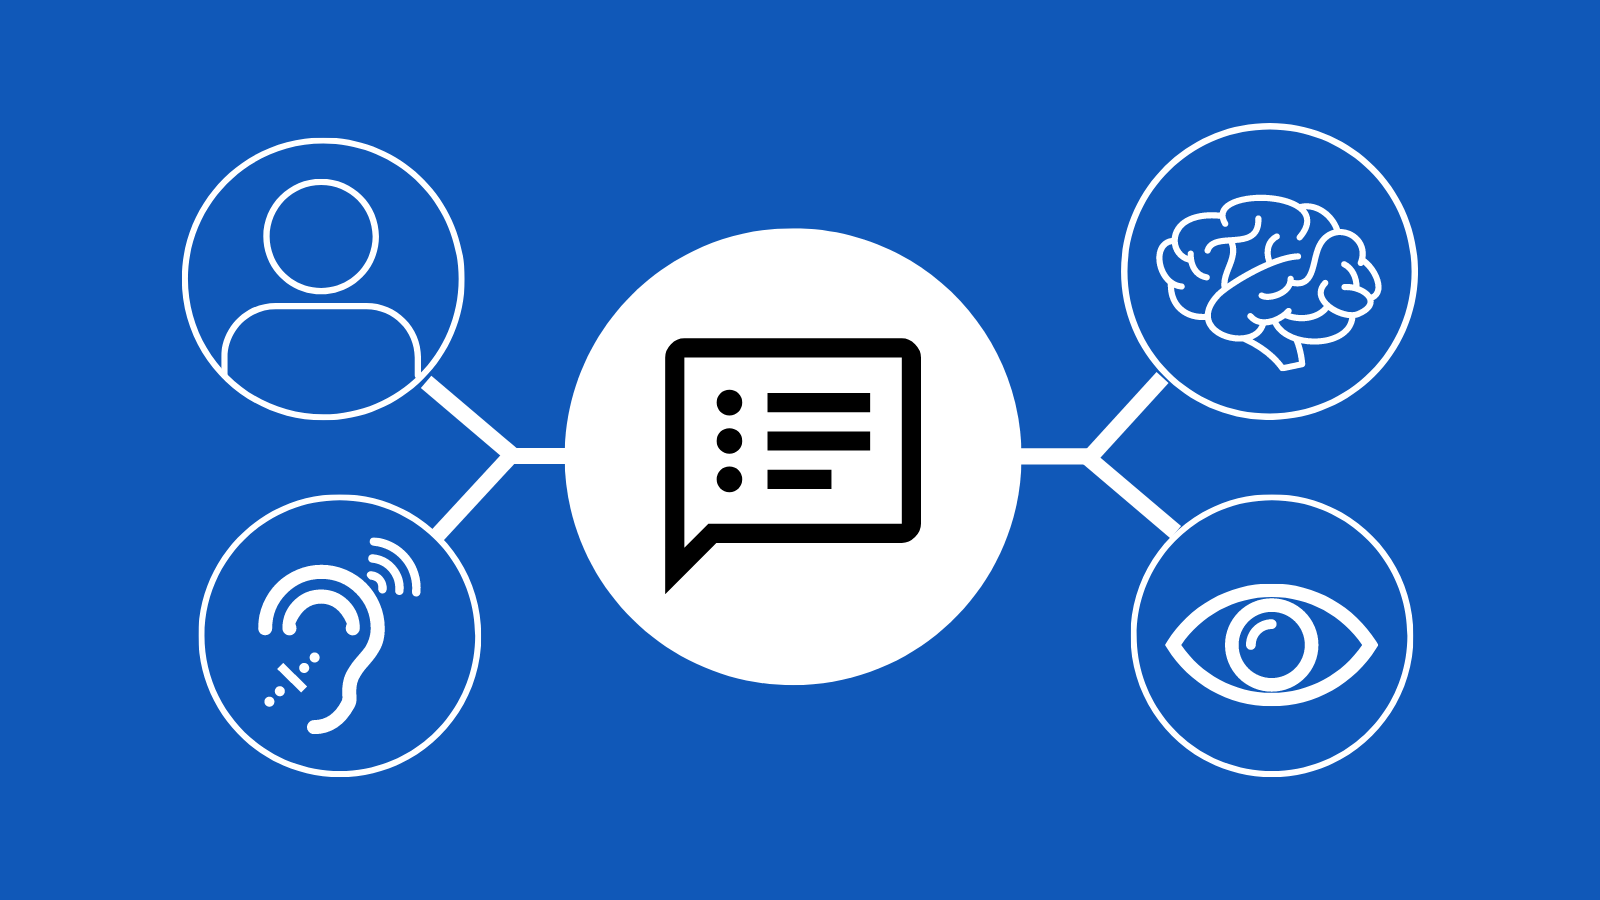 A group of icons on a blue background. Icons are of a person, brain, ear, and eye, centered around a transcript icon.